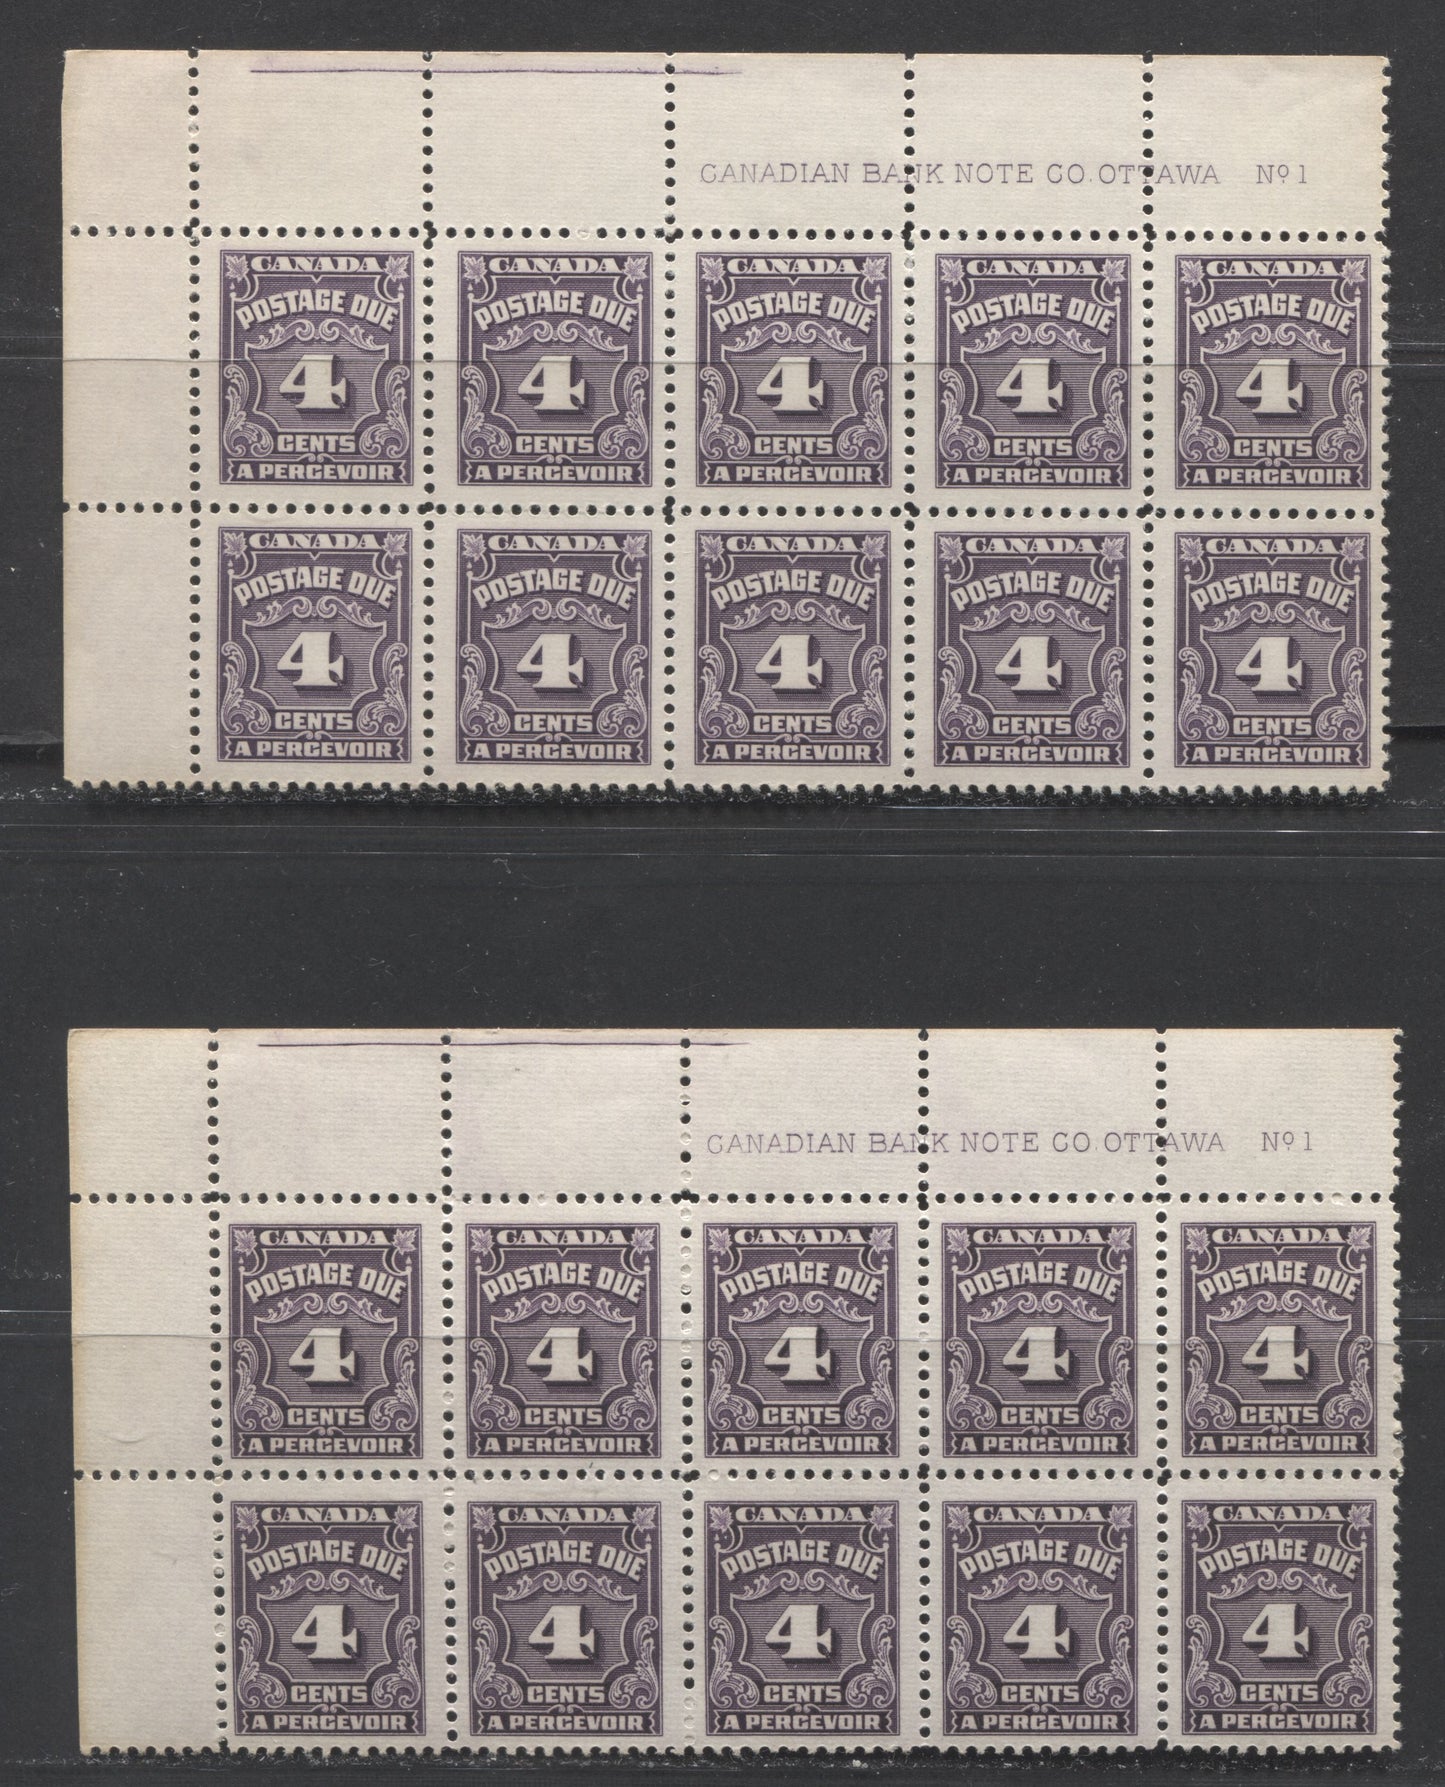 Lot 75 Canada #J17 4c Deep Violet & Deep Rose Lilac, 1935-1965 Fourth Postage Due Issue, 2 FNH UL Plate 1 Blocks Of 10 On Ribbed Paper With Smooth & Streaky Cream Gums, Both With Unlisted Re-Entries Showing Doubling Of 'Dian Bank No."